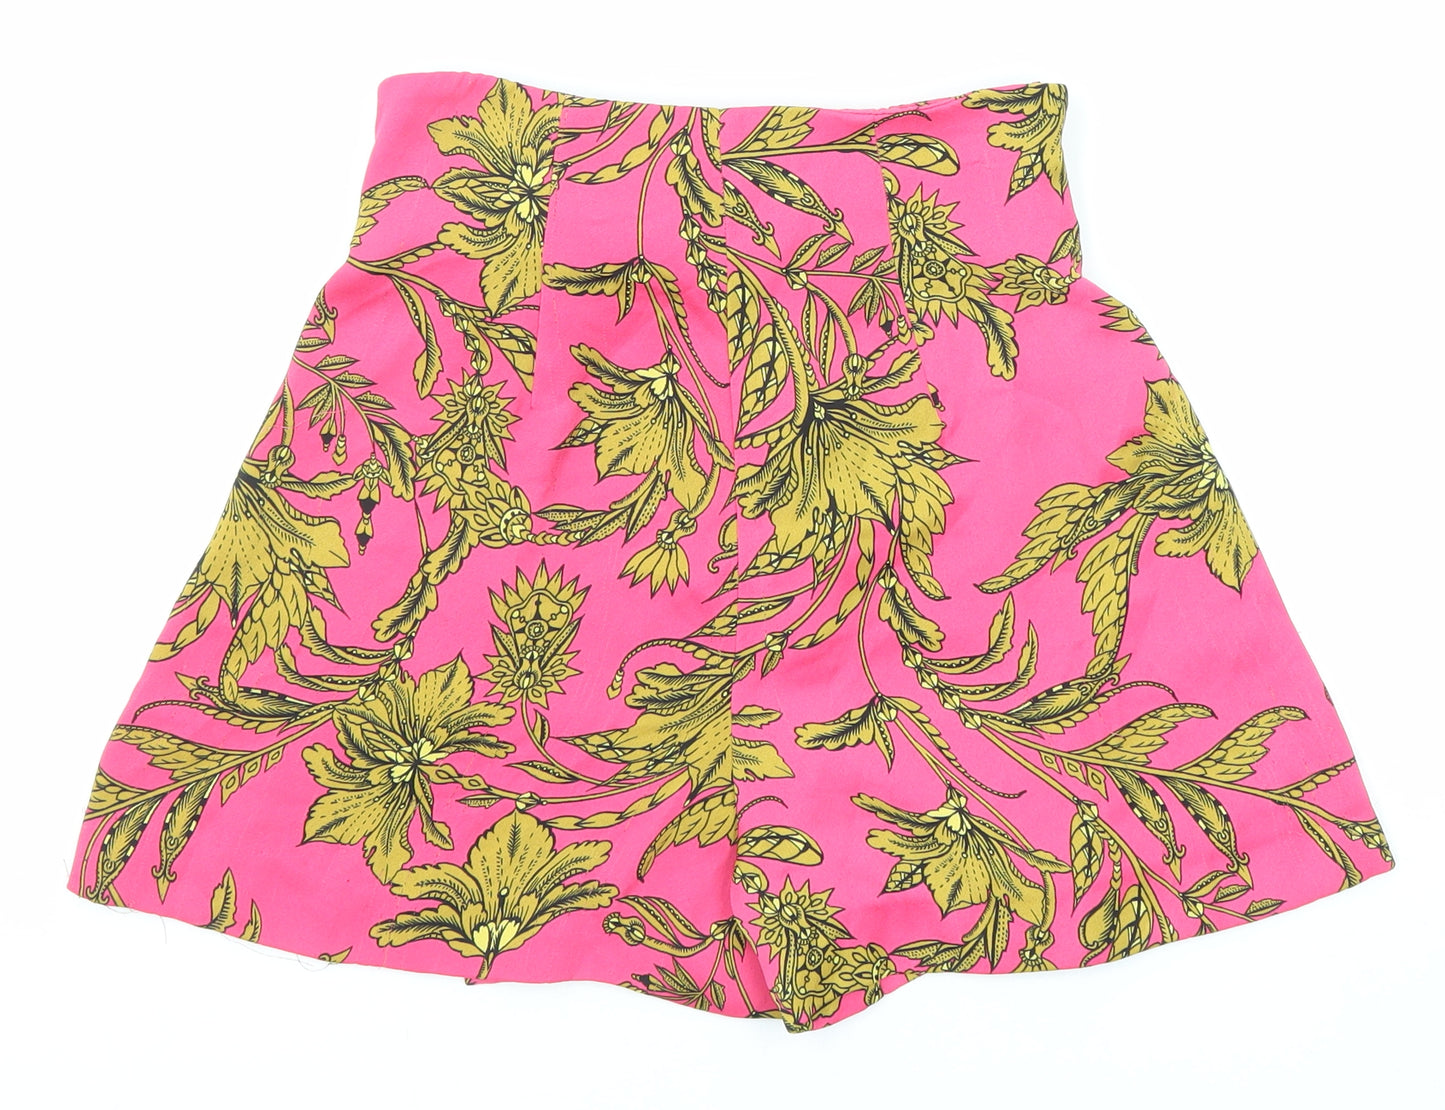 River Island Womens Pink Floral Polyester Basic Shorts Size 8 L3 in Regular Pull On - Belted